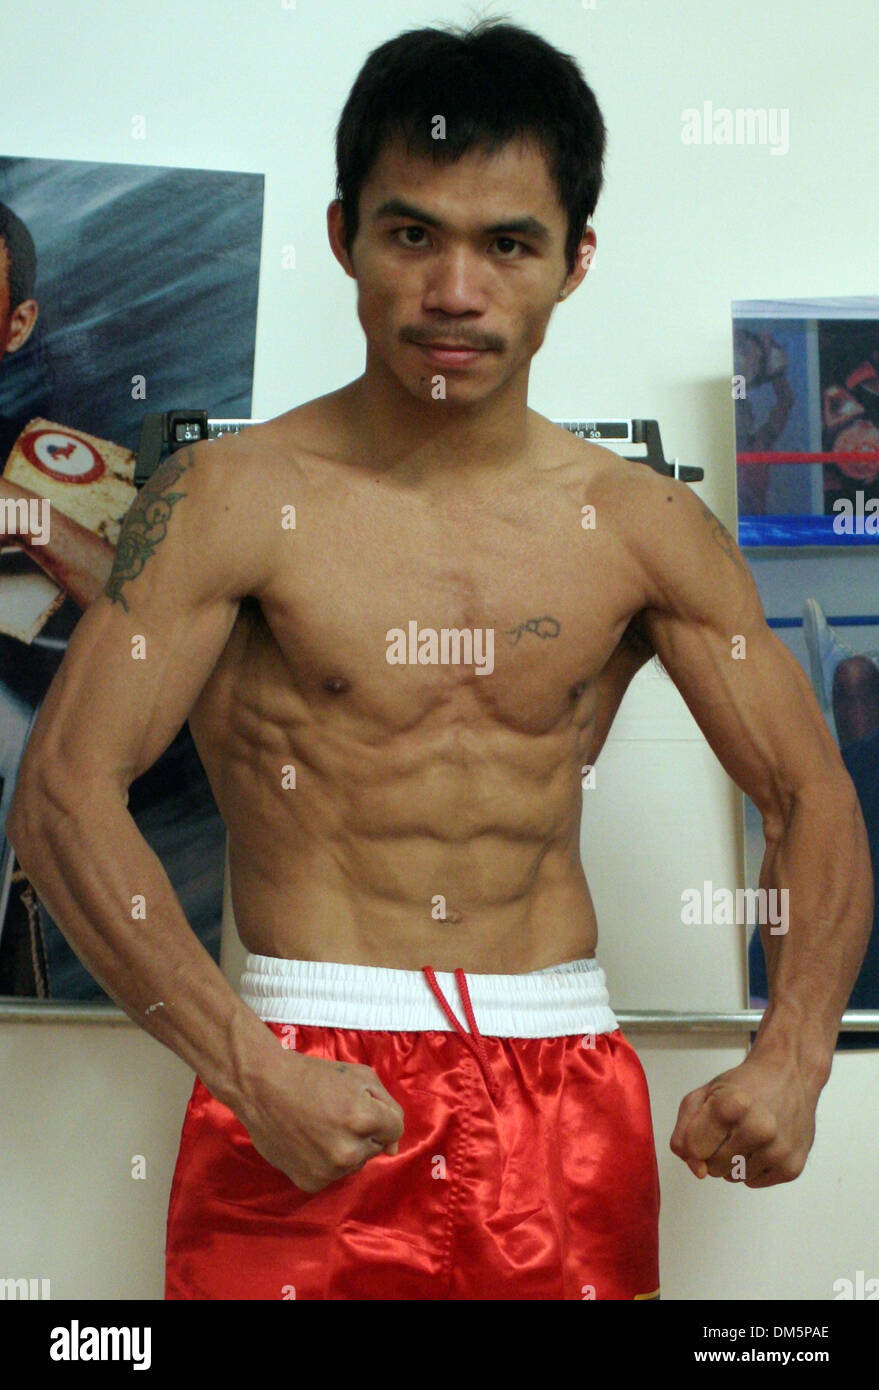 Mar 17, 2005; Las Vegas, NV, USA; Boxer MANNY PACQUIAO at his final training session before his March 19th fight at the MGM Grand in Las Vegas. Pacquaio faces Erik 'El Terrible' Morales in a super featherweight title fight at the MGM Grand Garden. Morales, 47-2 with 3 knockouts, is a three time world champion from Tijuana, Mexico. Pacquiao 39-2-2 with 30 knockouts, is a two time wo Stock Photo